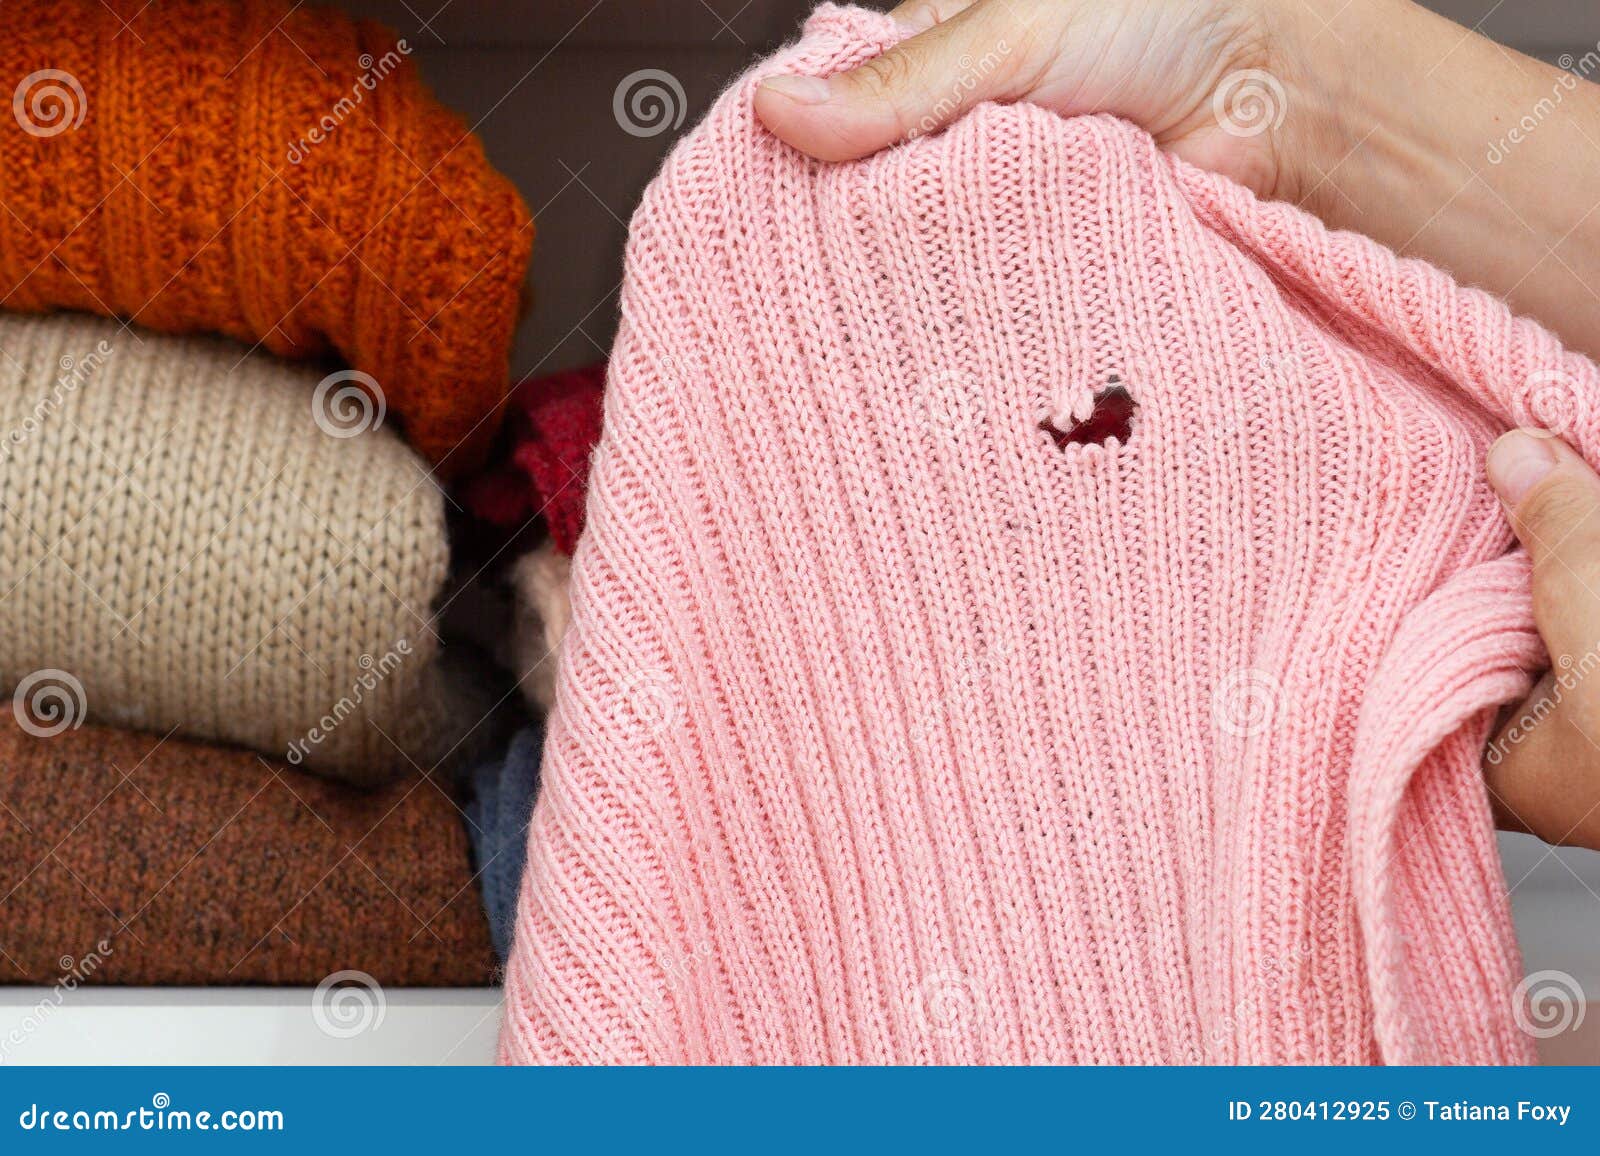 Hands Holding Woolen Knitted Cloth with Hole Stock Image - Image of ...